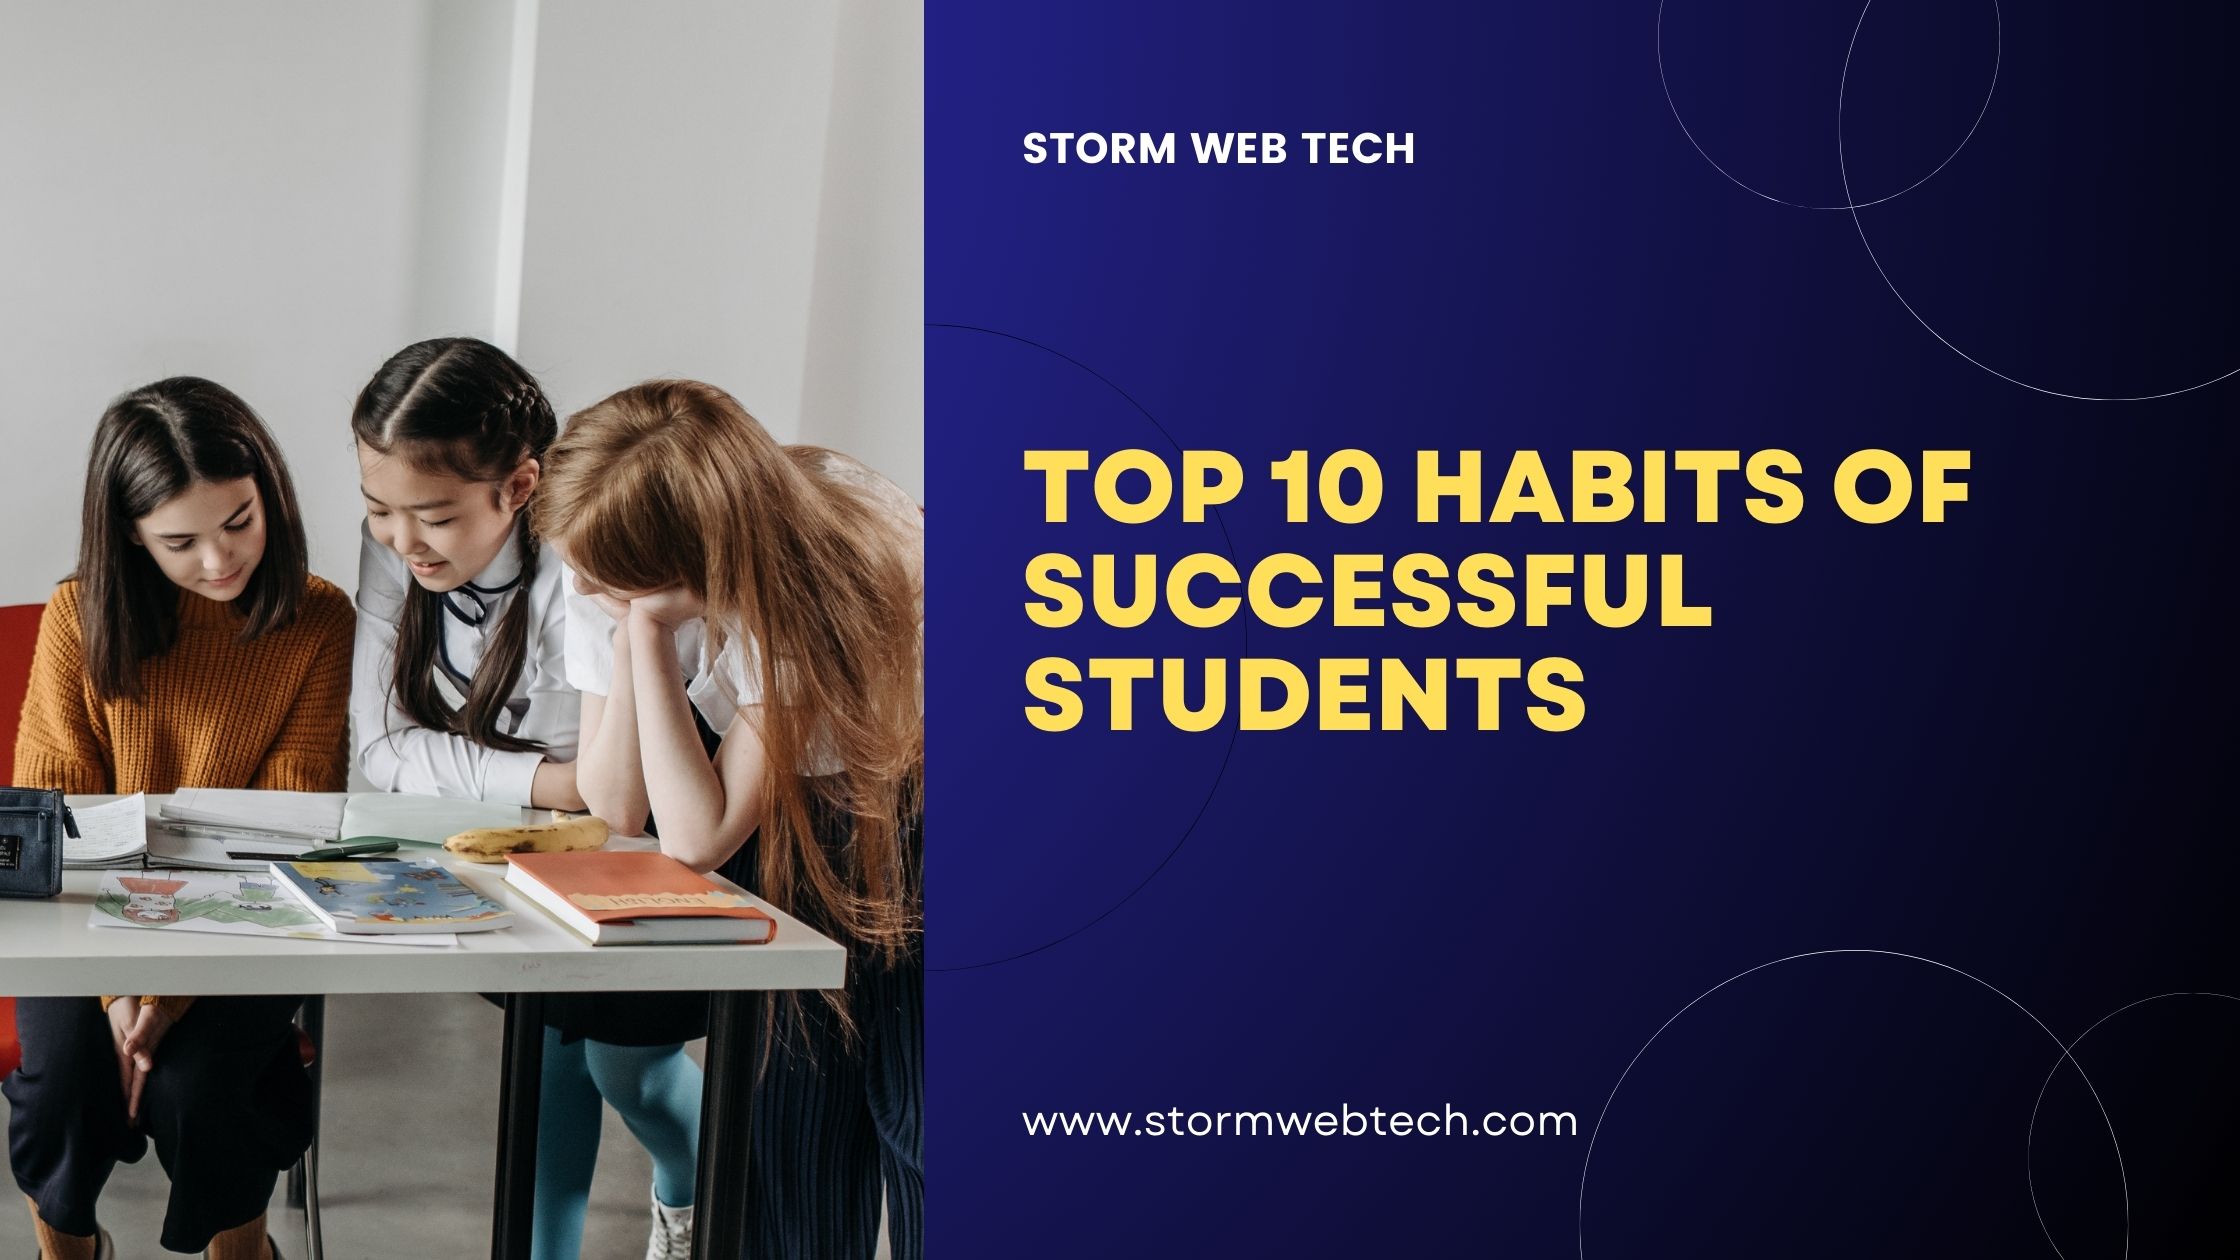 top 10 habits of successful students cultivate to achieve their goals, successful students have a set of habits that helps them to motivated